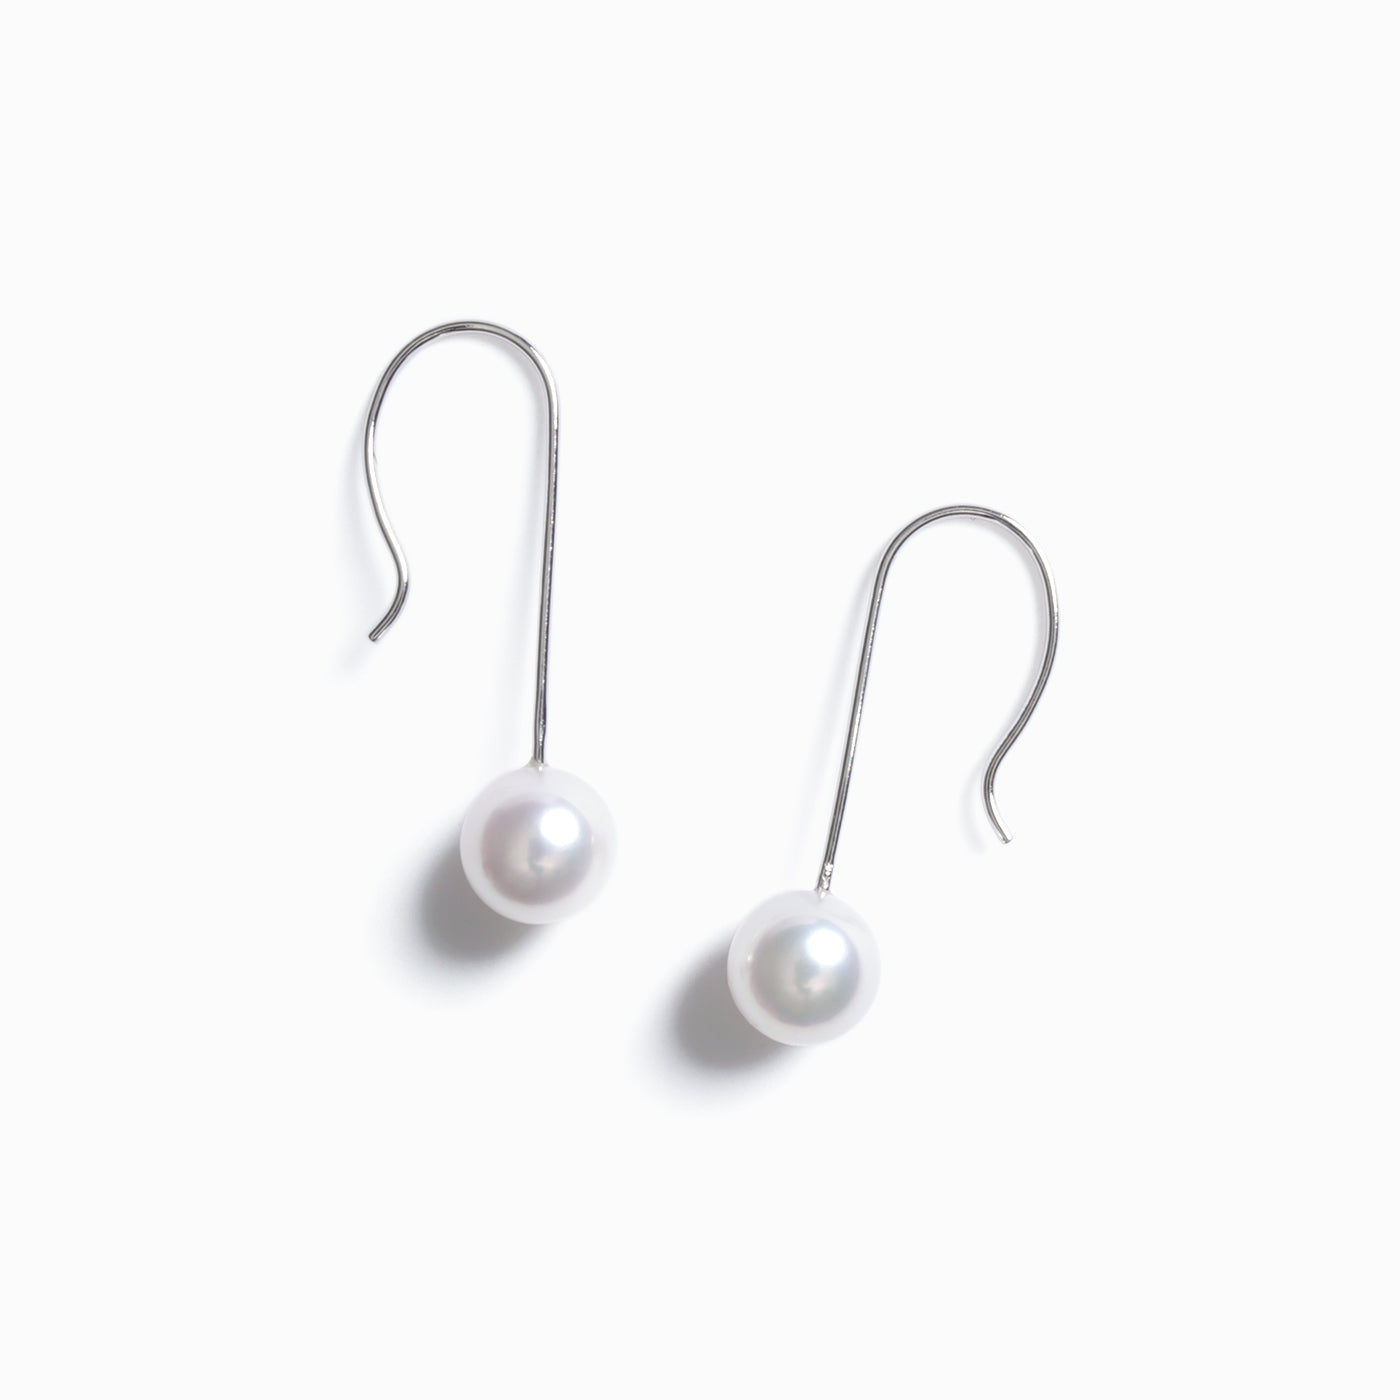 【OUTLET】14K WG Eighth Note earrings - アコヤパール